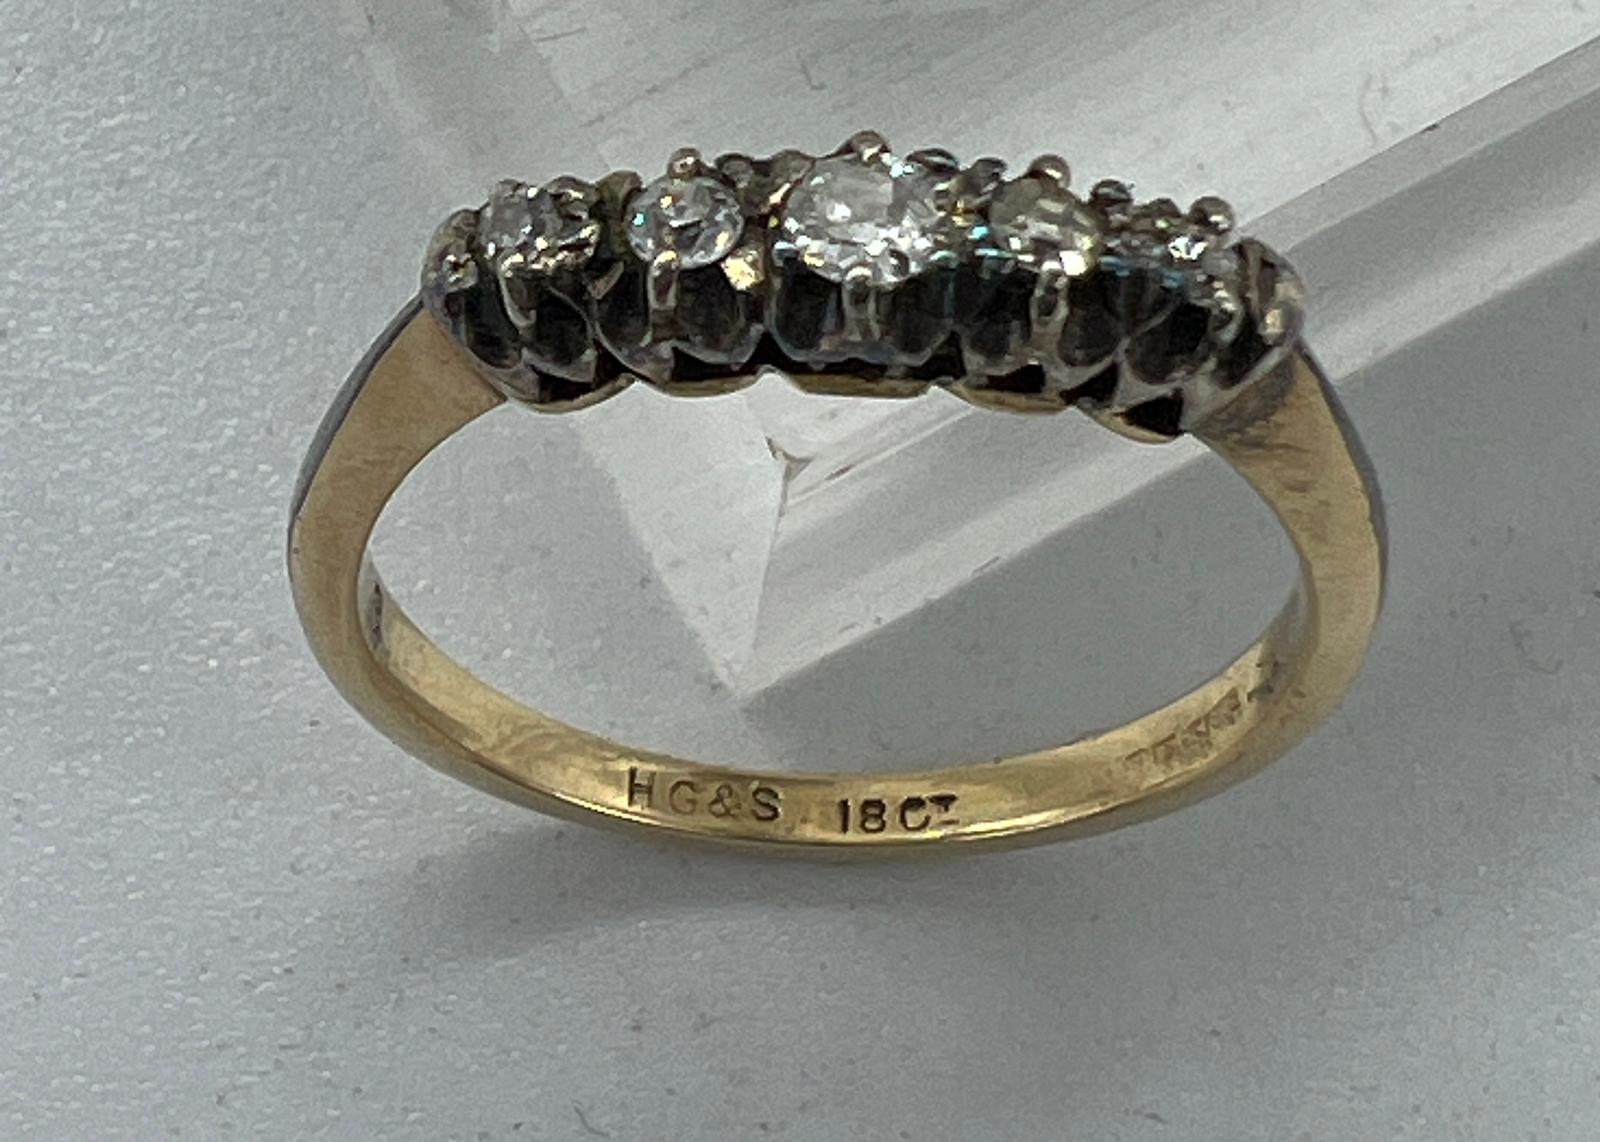 An 18ct five stone diamond ring, approximate size N